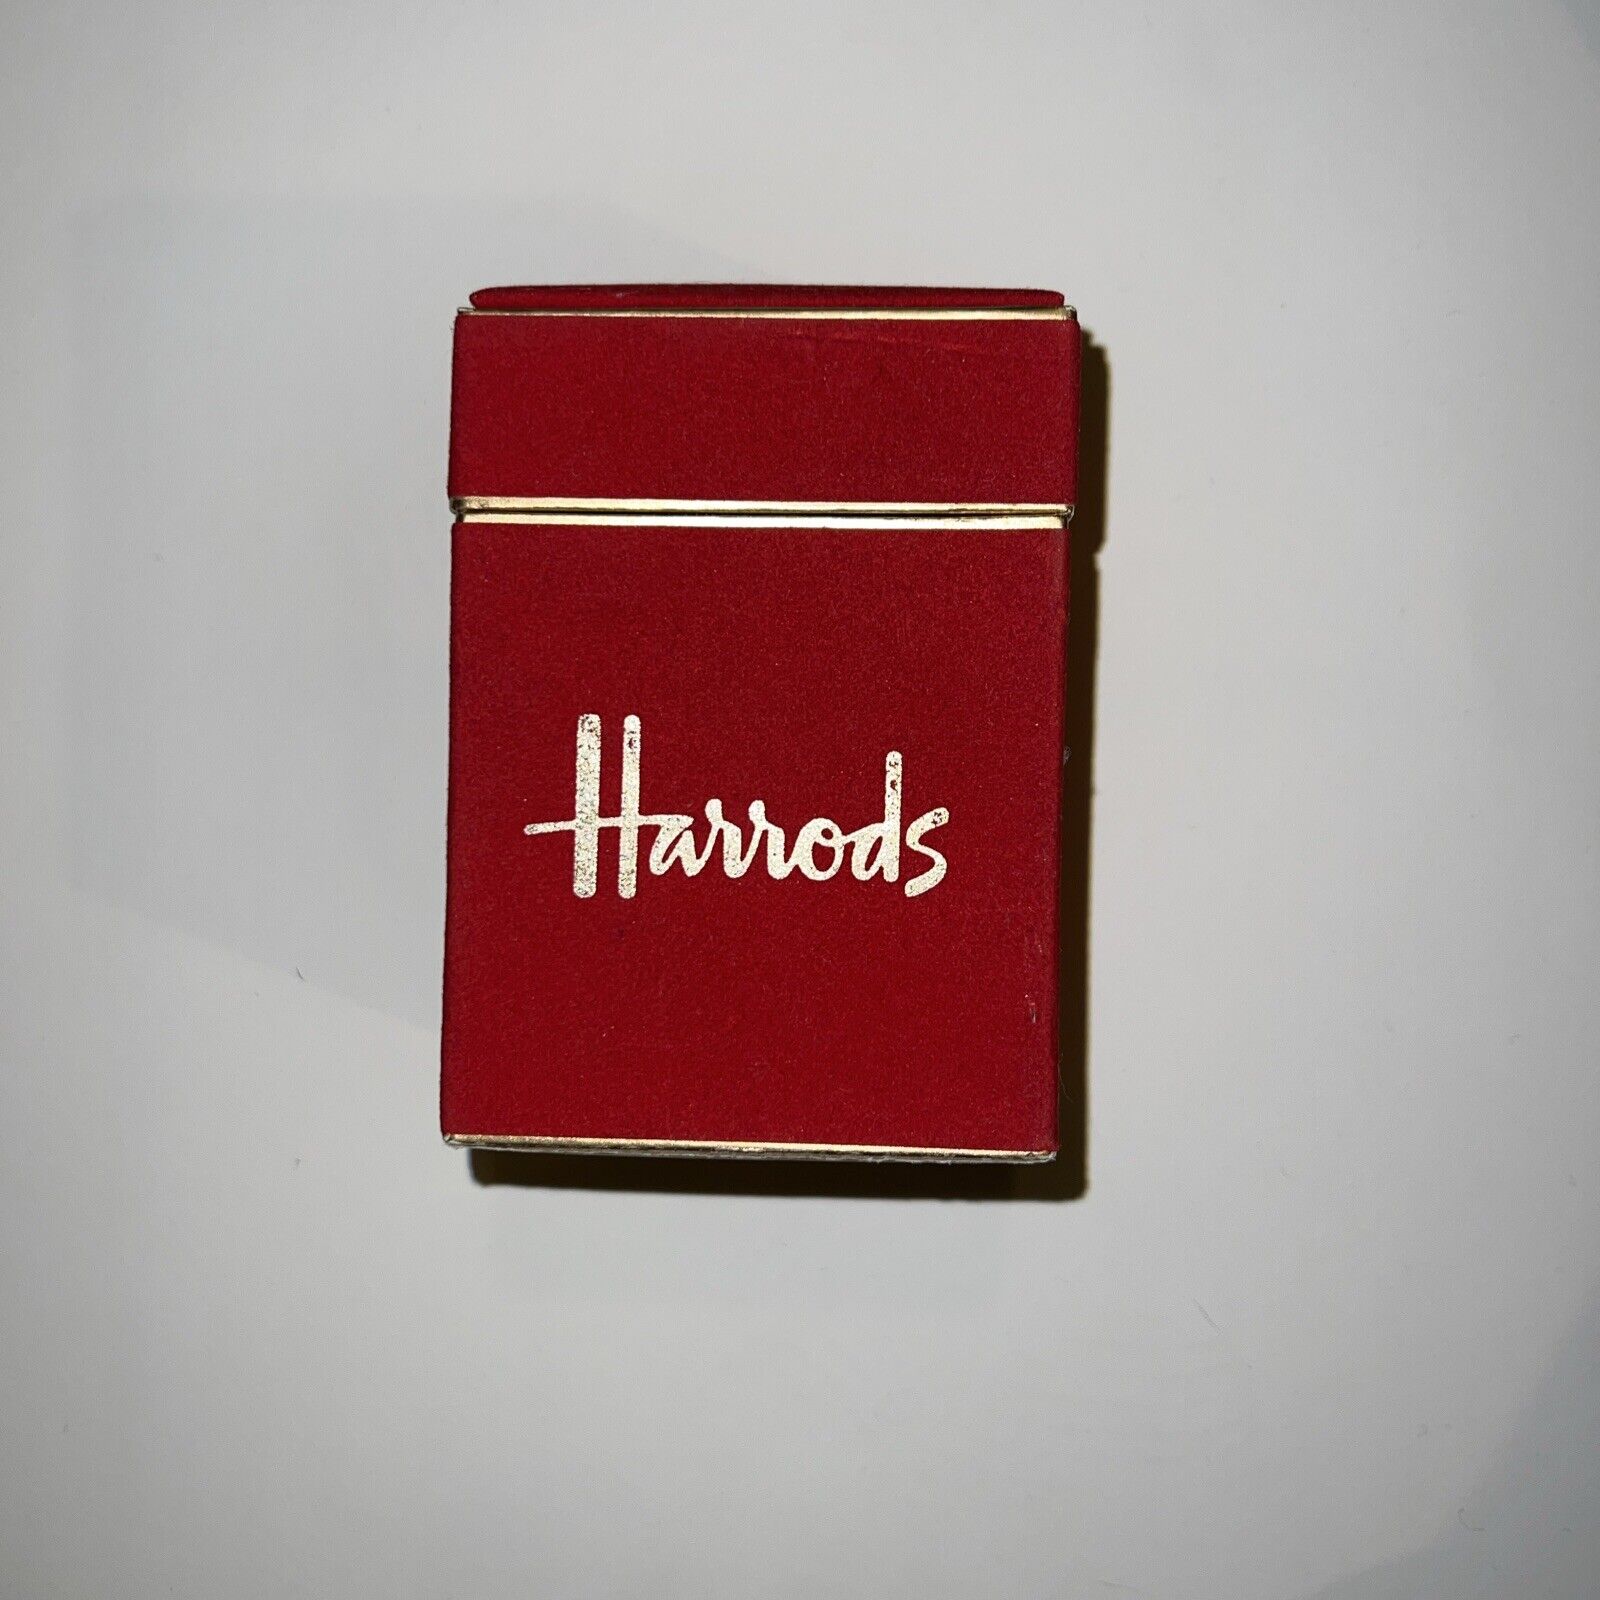 Harrods 2 Deck Playing Cards Velvet Box House of Parliament St Paul’s Cathedral